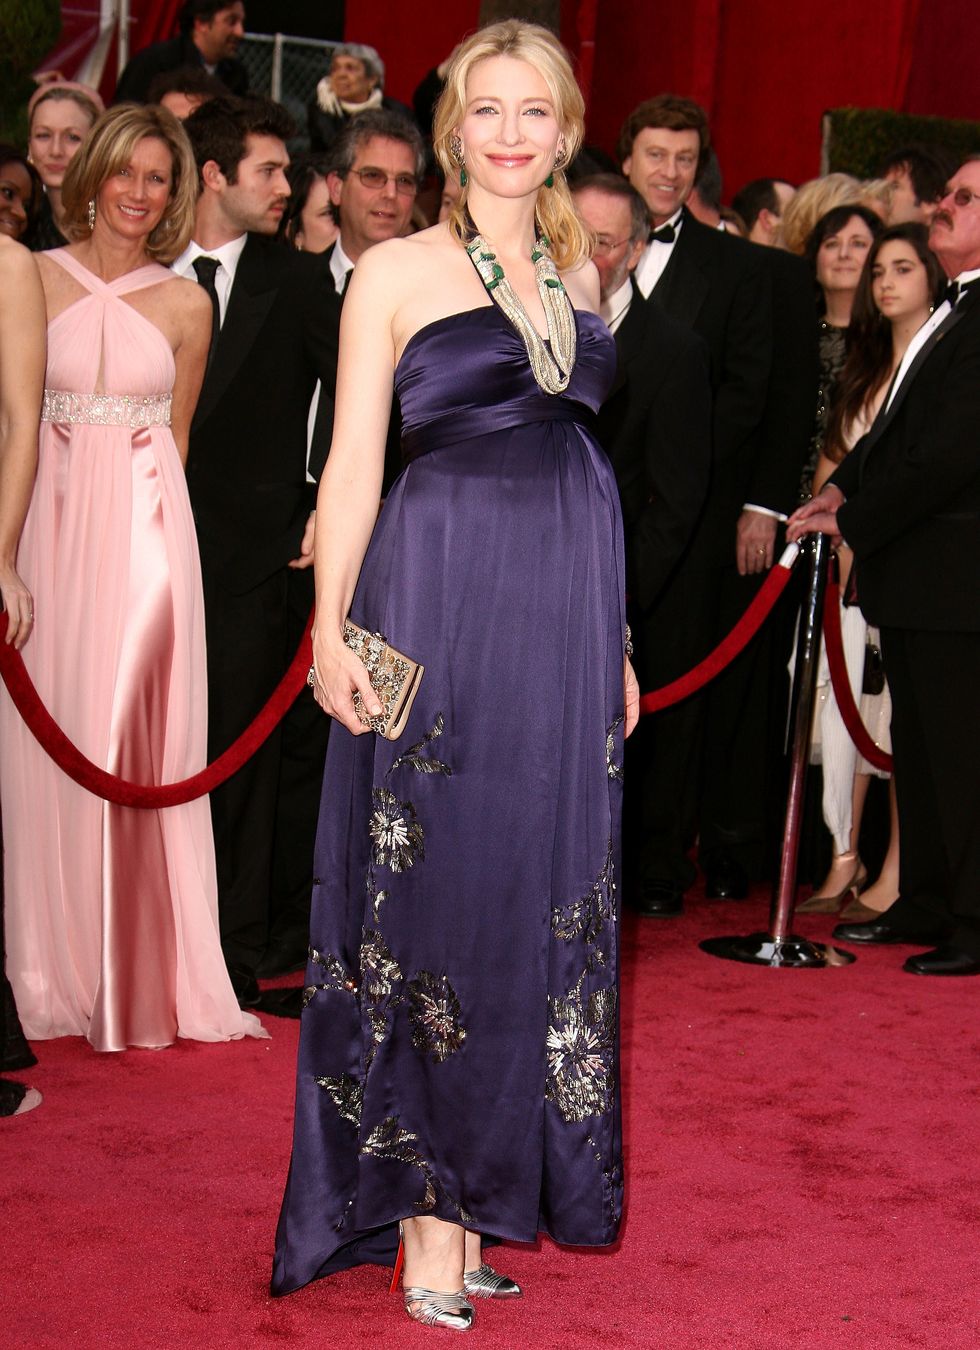 hollywood february 24 actress cate blanchett attends the 80th annual academy awards at the kodak theatre on february 24, 2008 in los angeles, california photo by steve granitzwireimage 